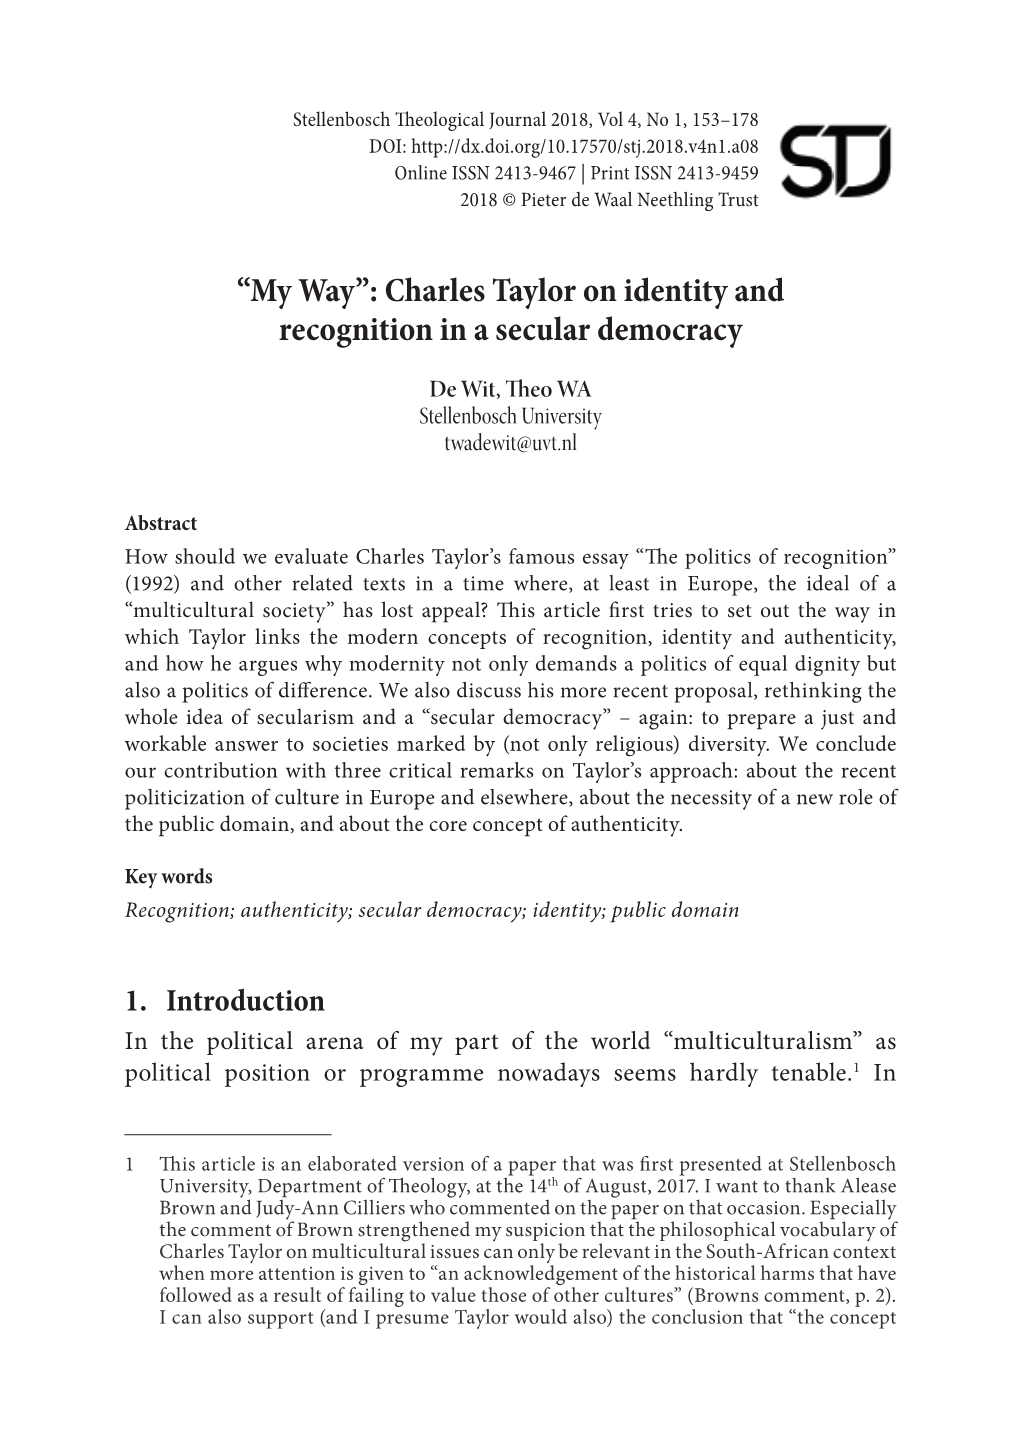 Charles Taylor on Identity and Recognition in a Secular Democracy